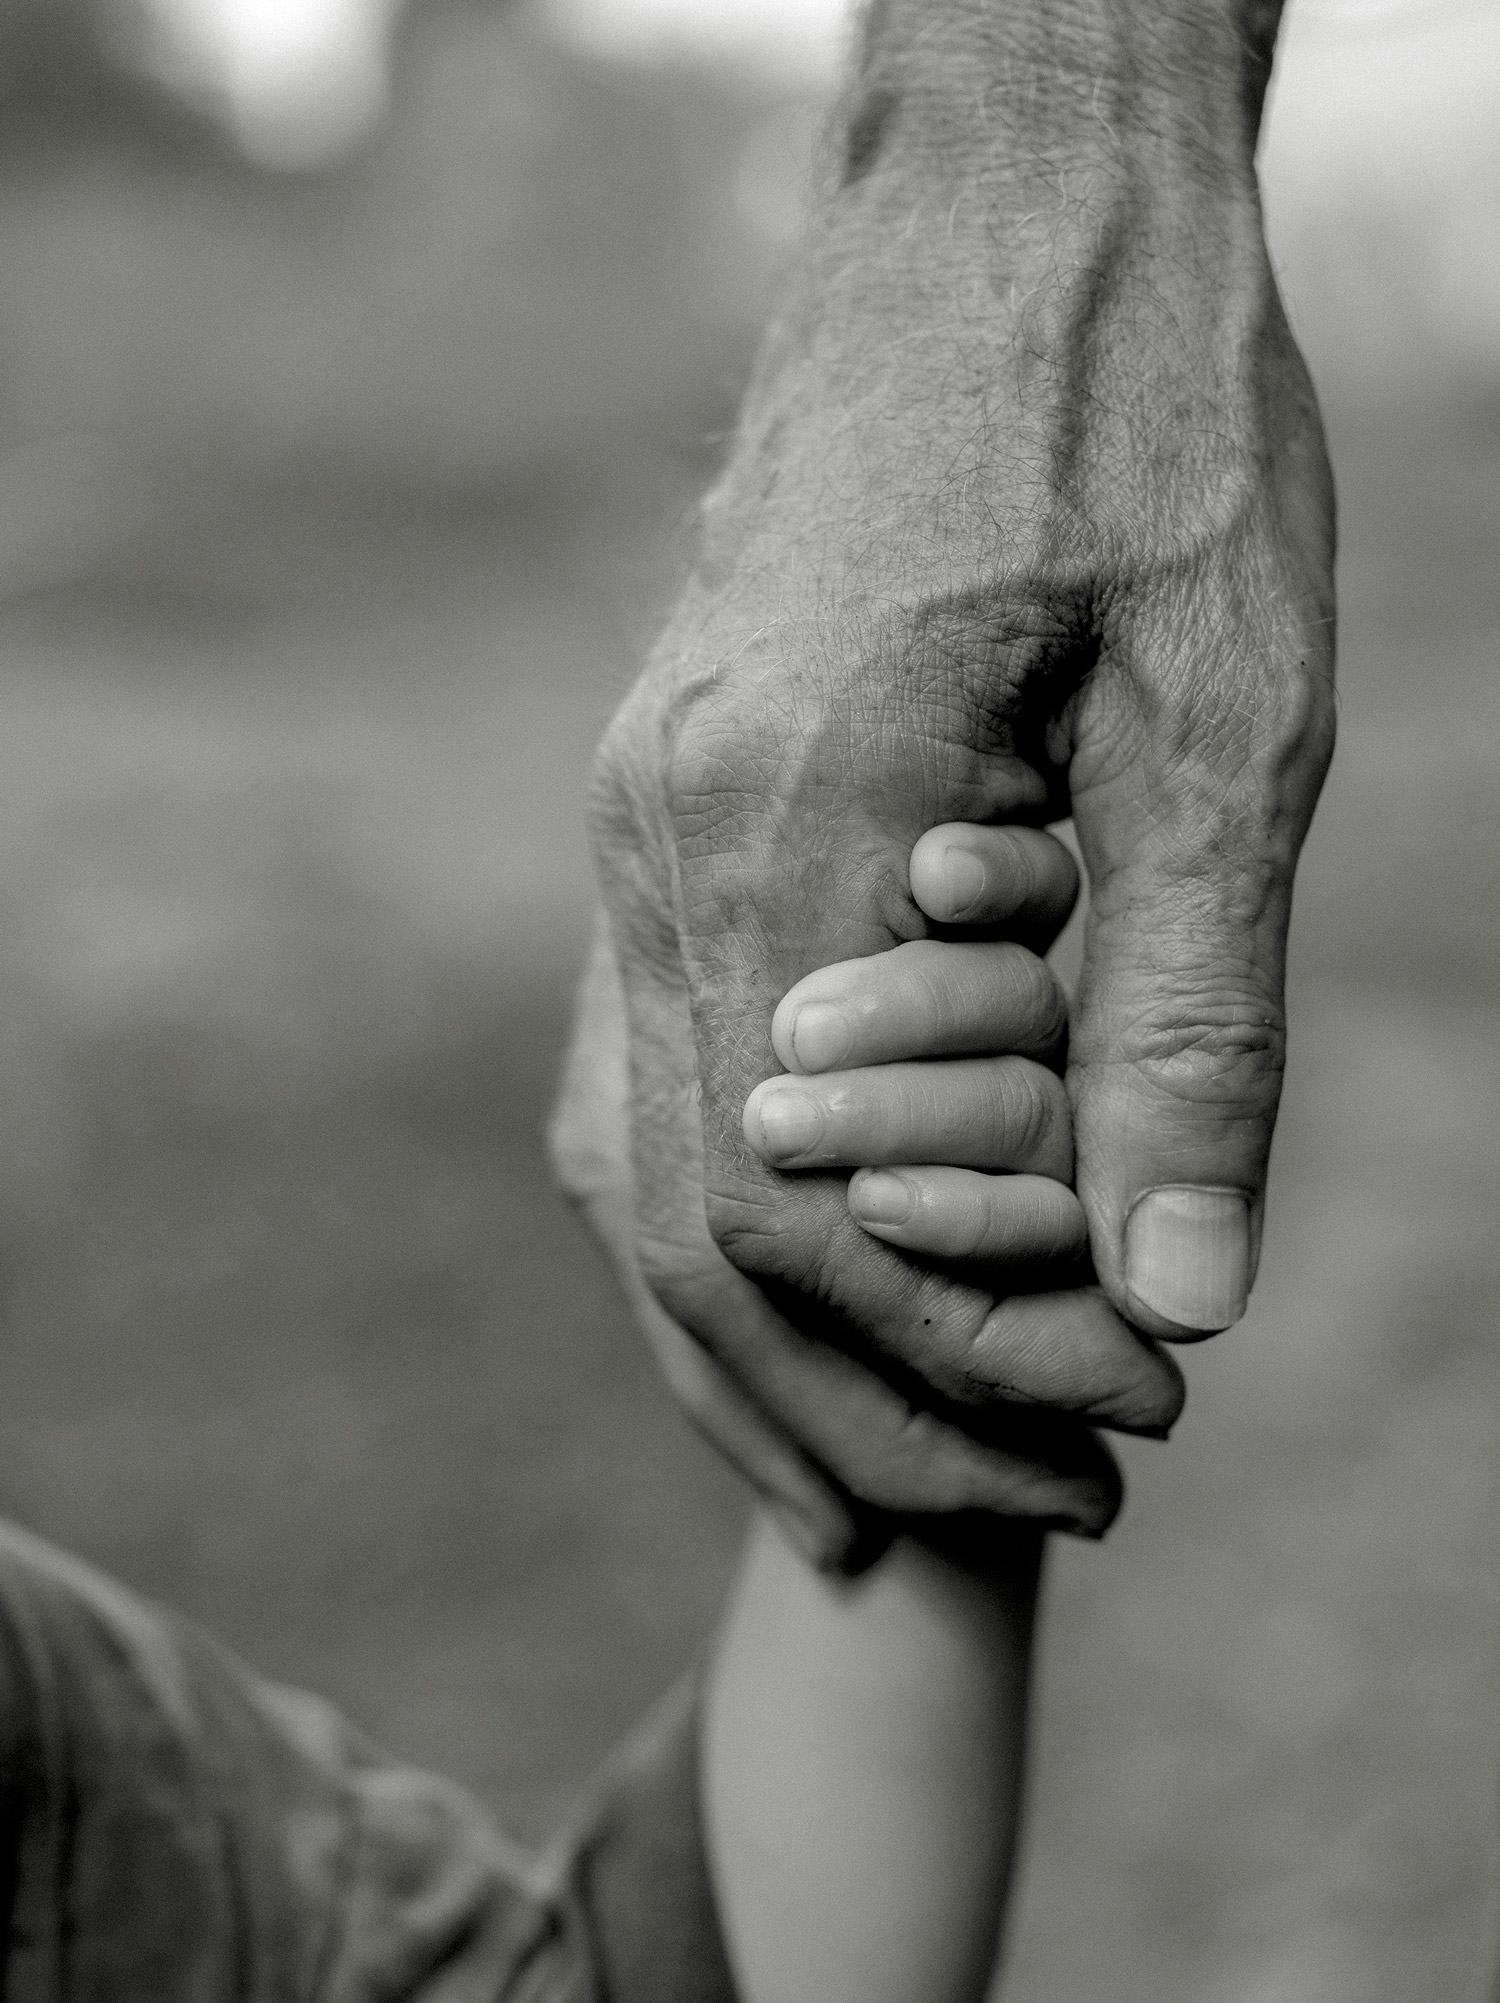 Black and white image of a person holding a kids' hand